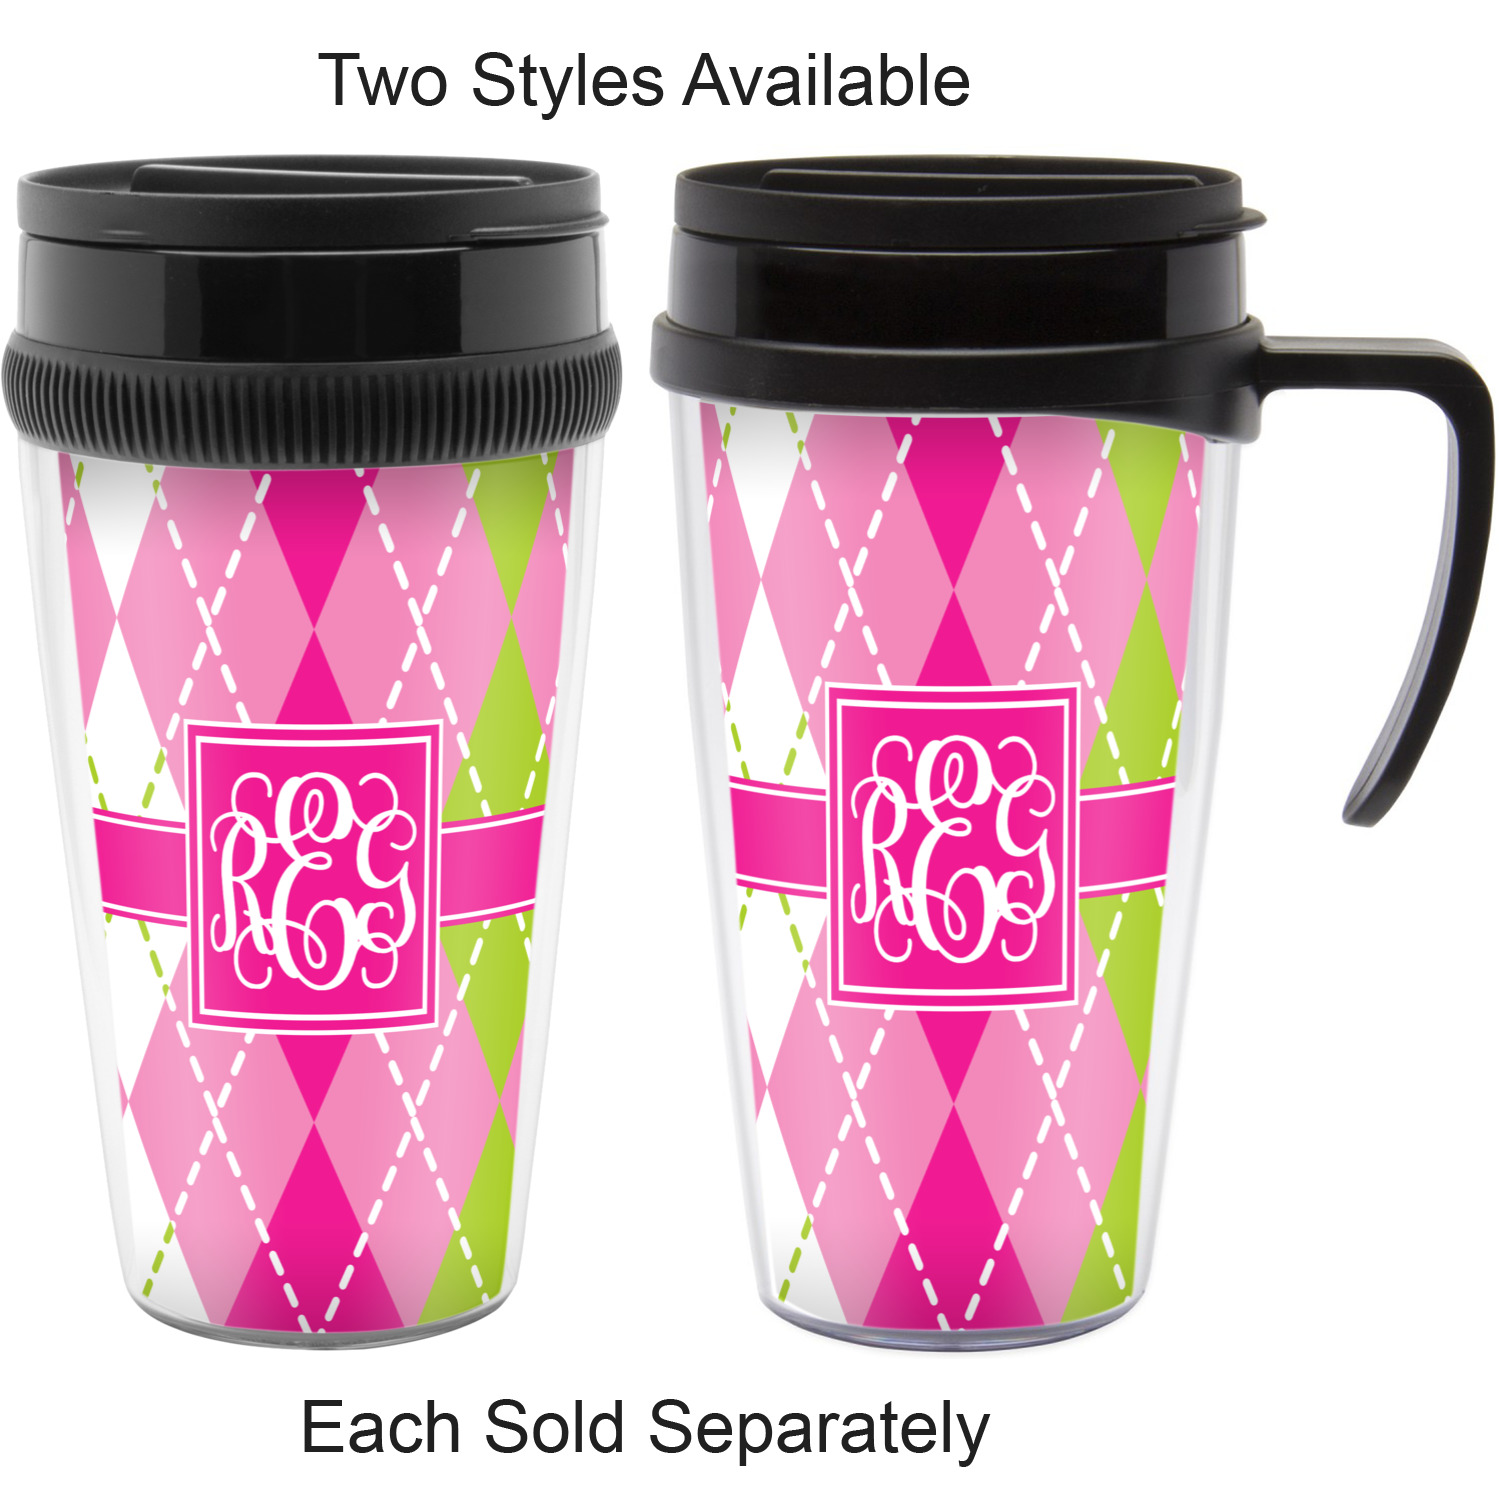 https://www.youcustomizeit.com/common/MAKE/224736/Pink-Green-Argyle-Travel-Mugs-with-without-Handle.jpg?lm=1671238377